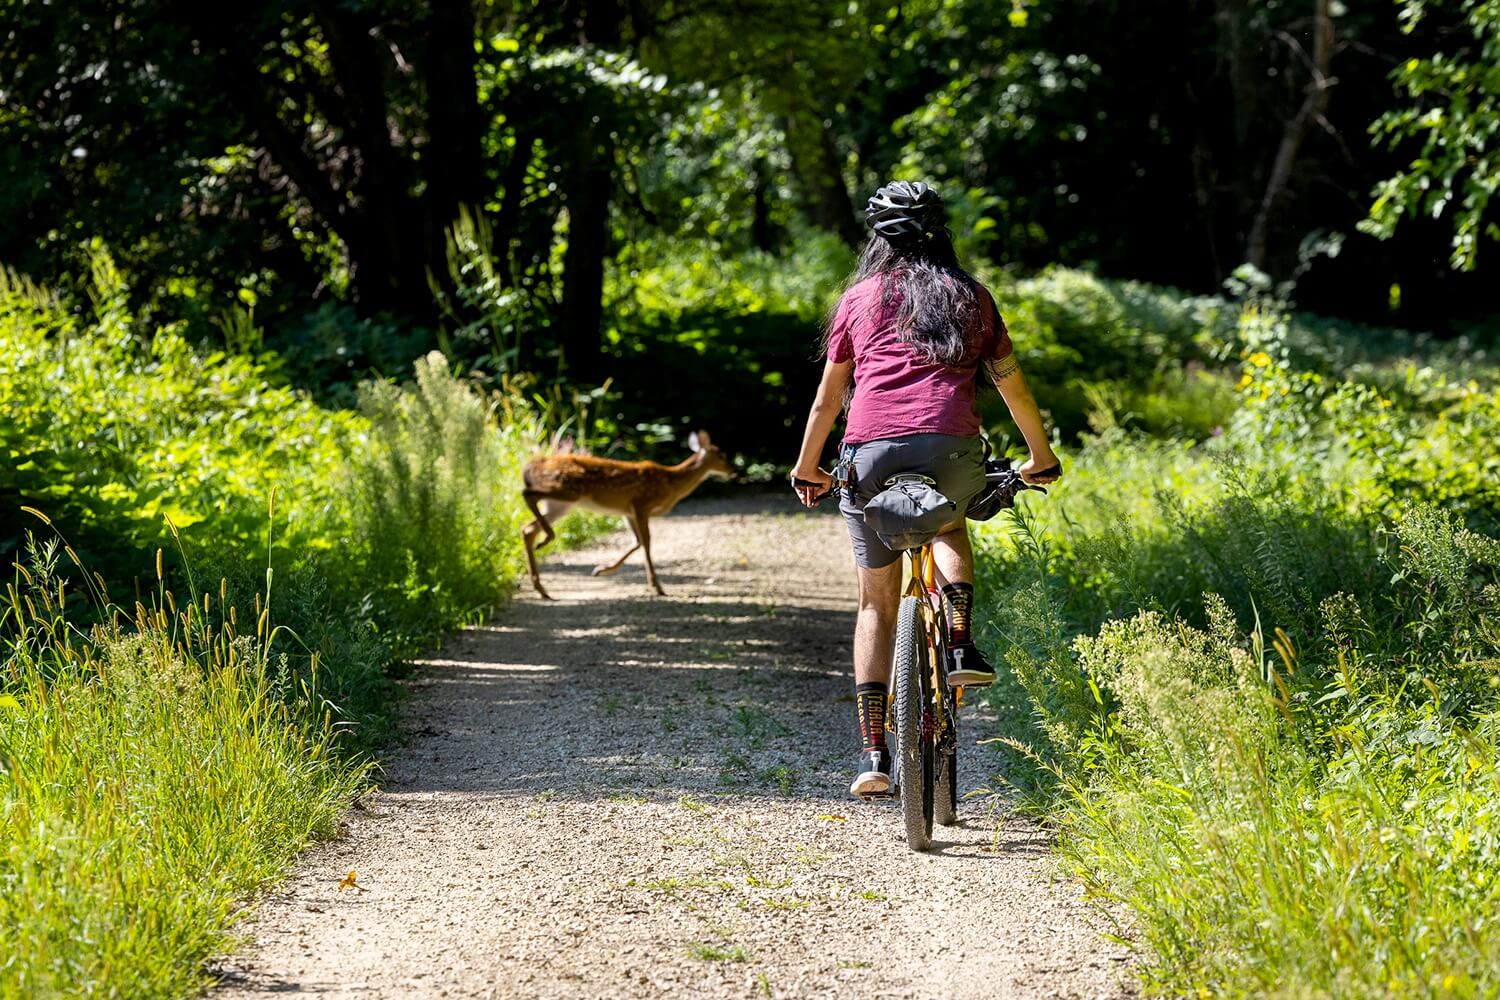 Cyclist shown from behind rides on a gravel trail as a deer crosses the path.